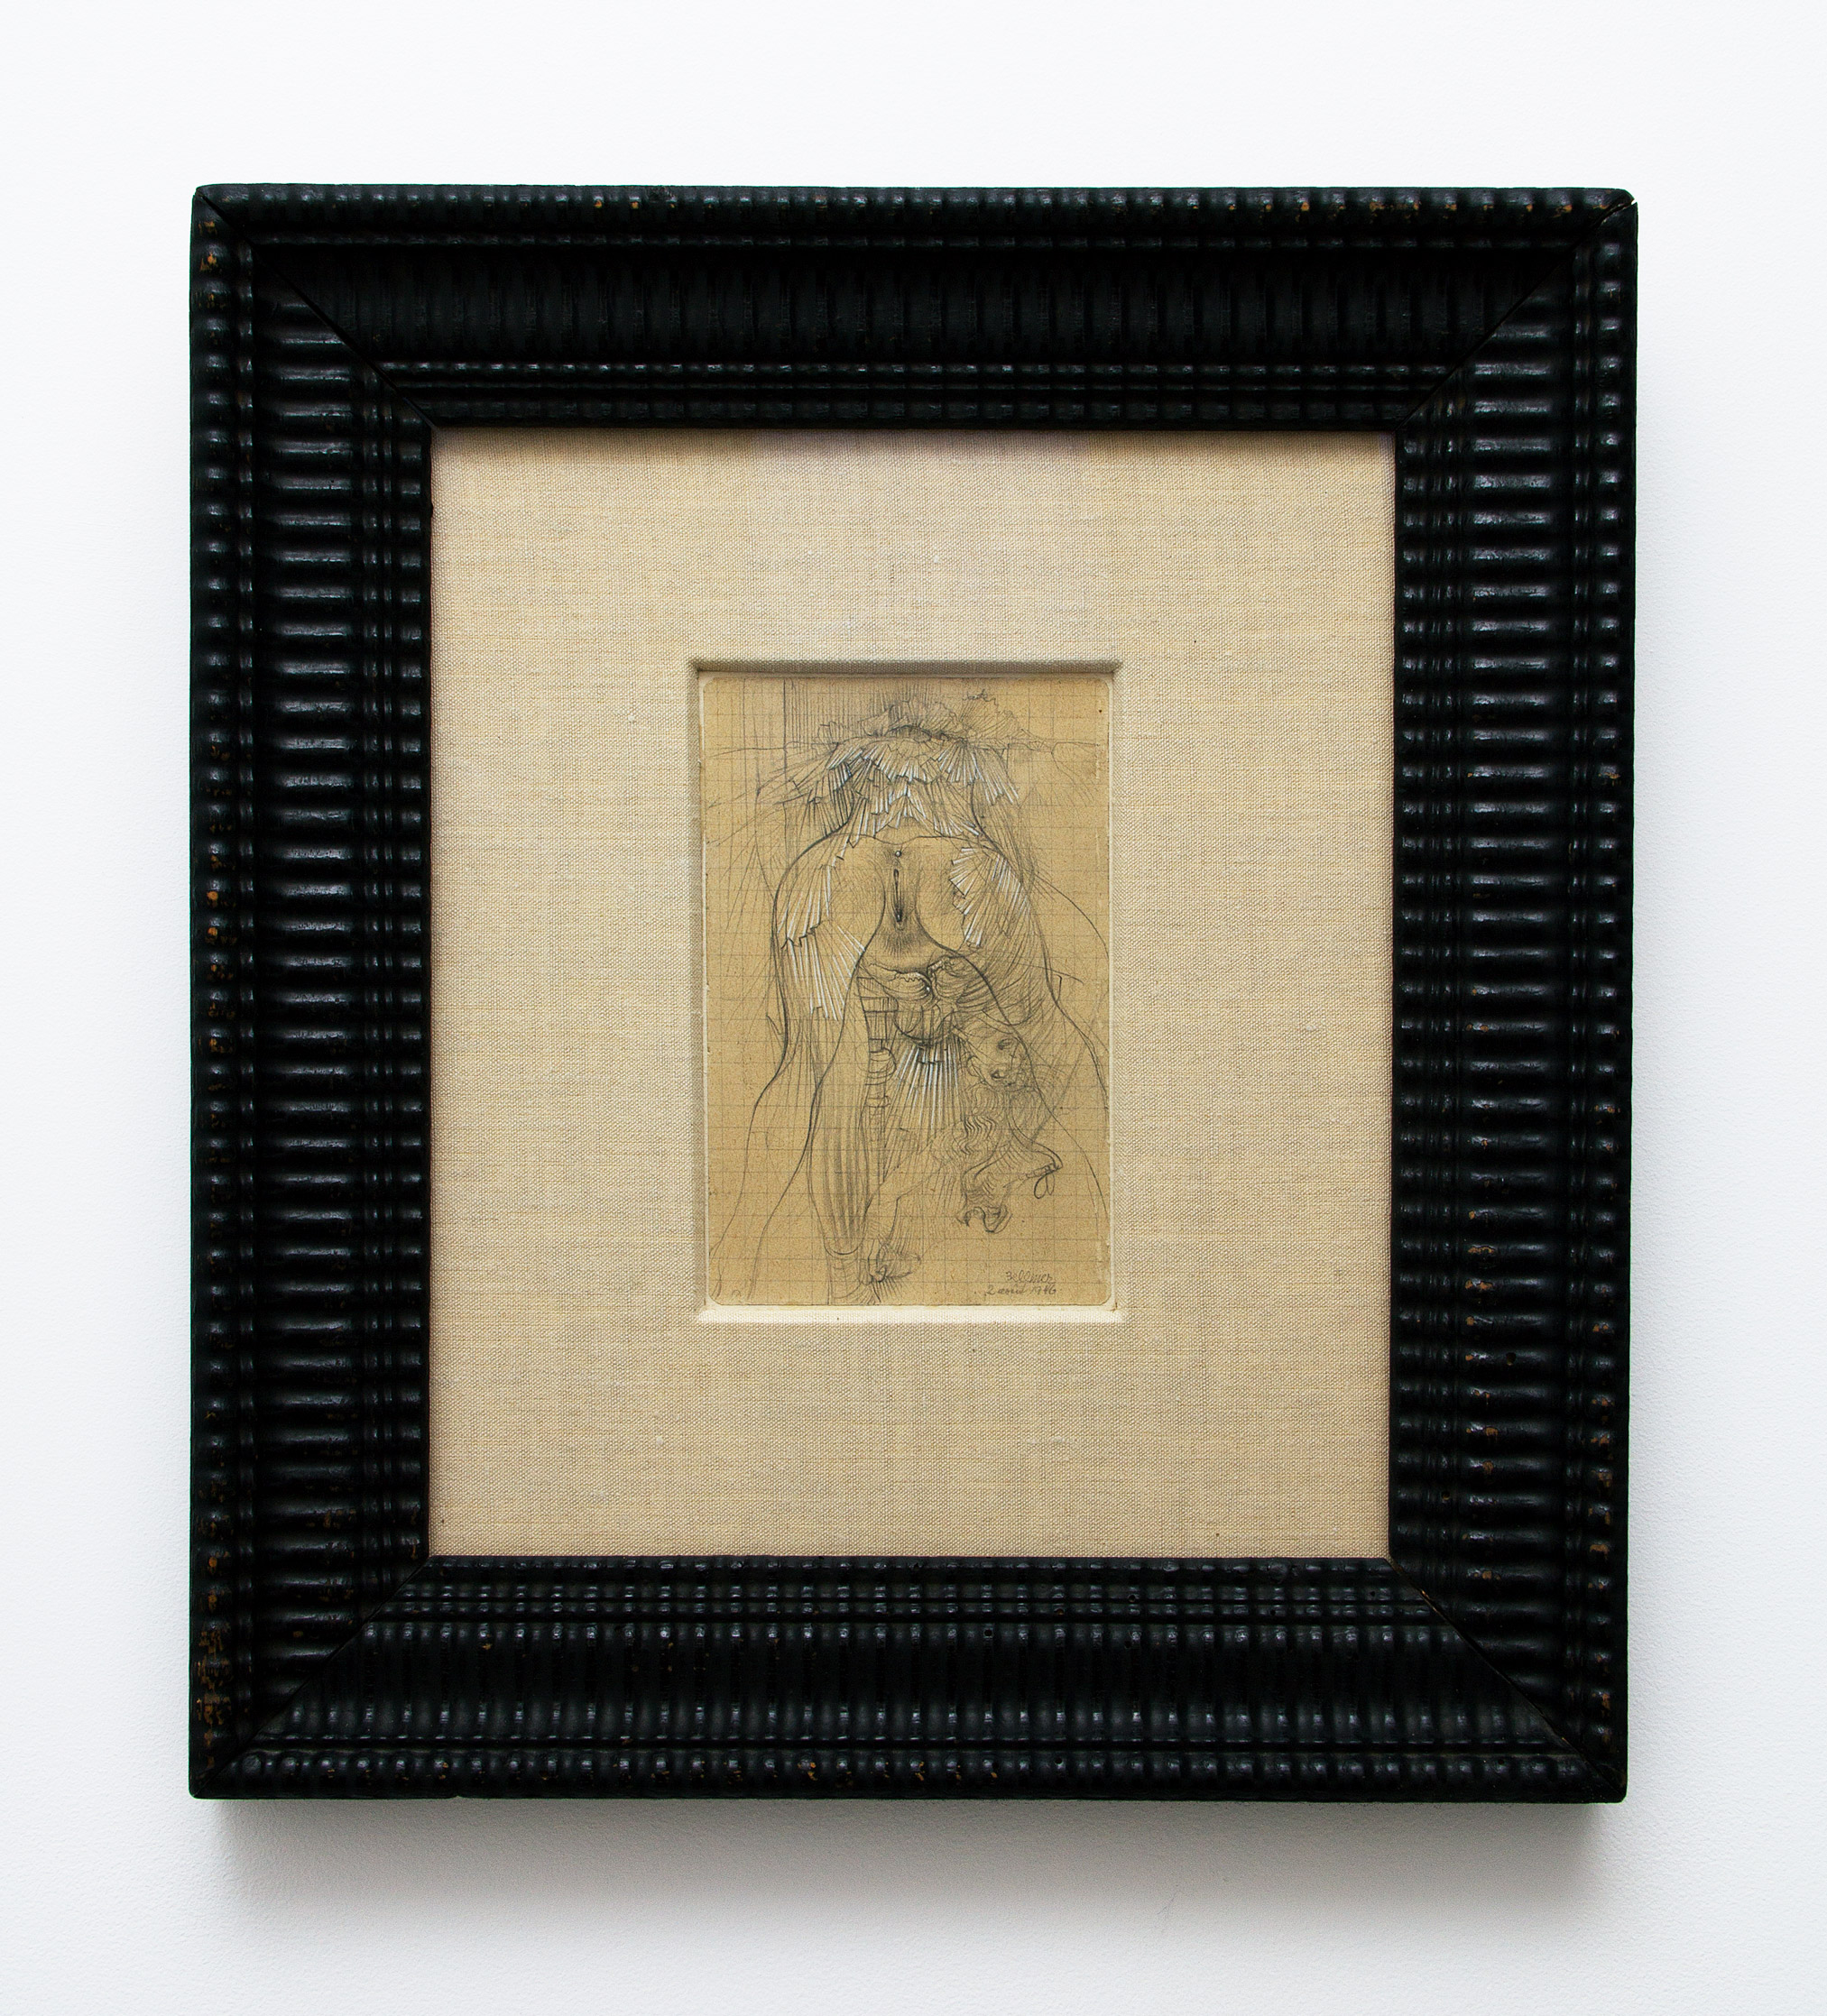 Hans Bellmer, Untitled, 1946, graphite and white gouache on paper, 5.5h x 3.63w in.